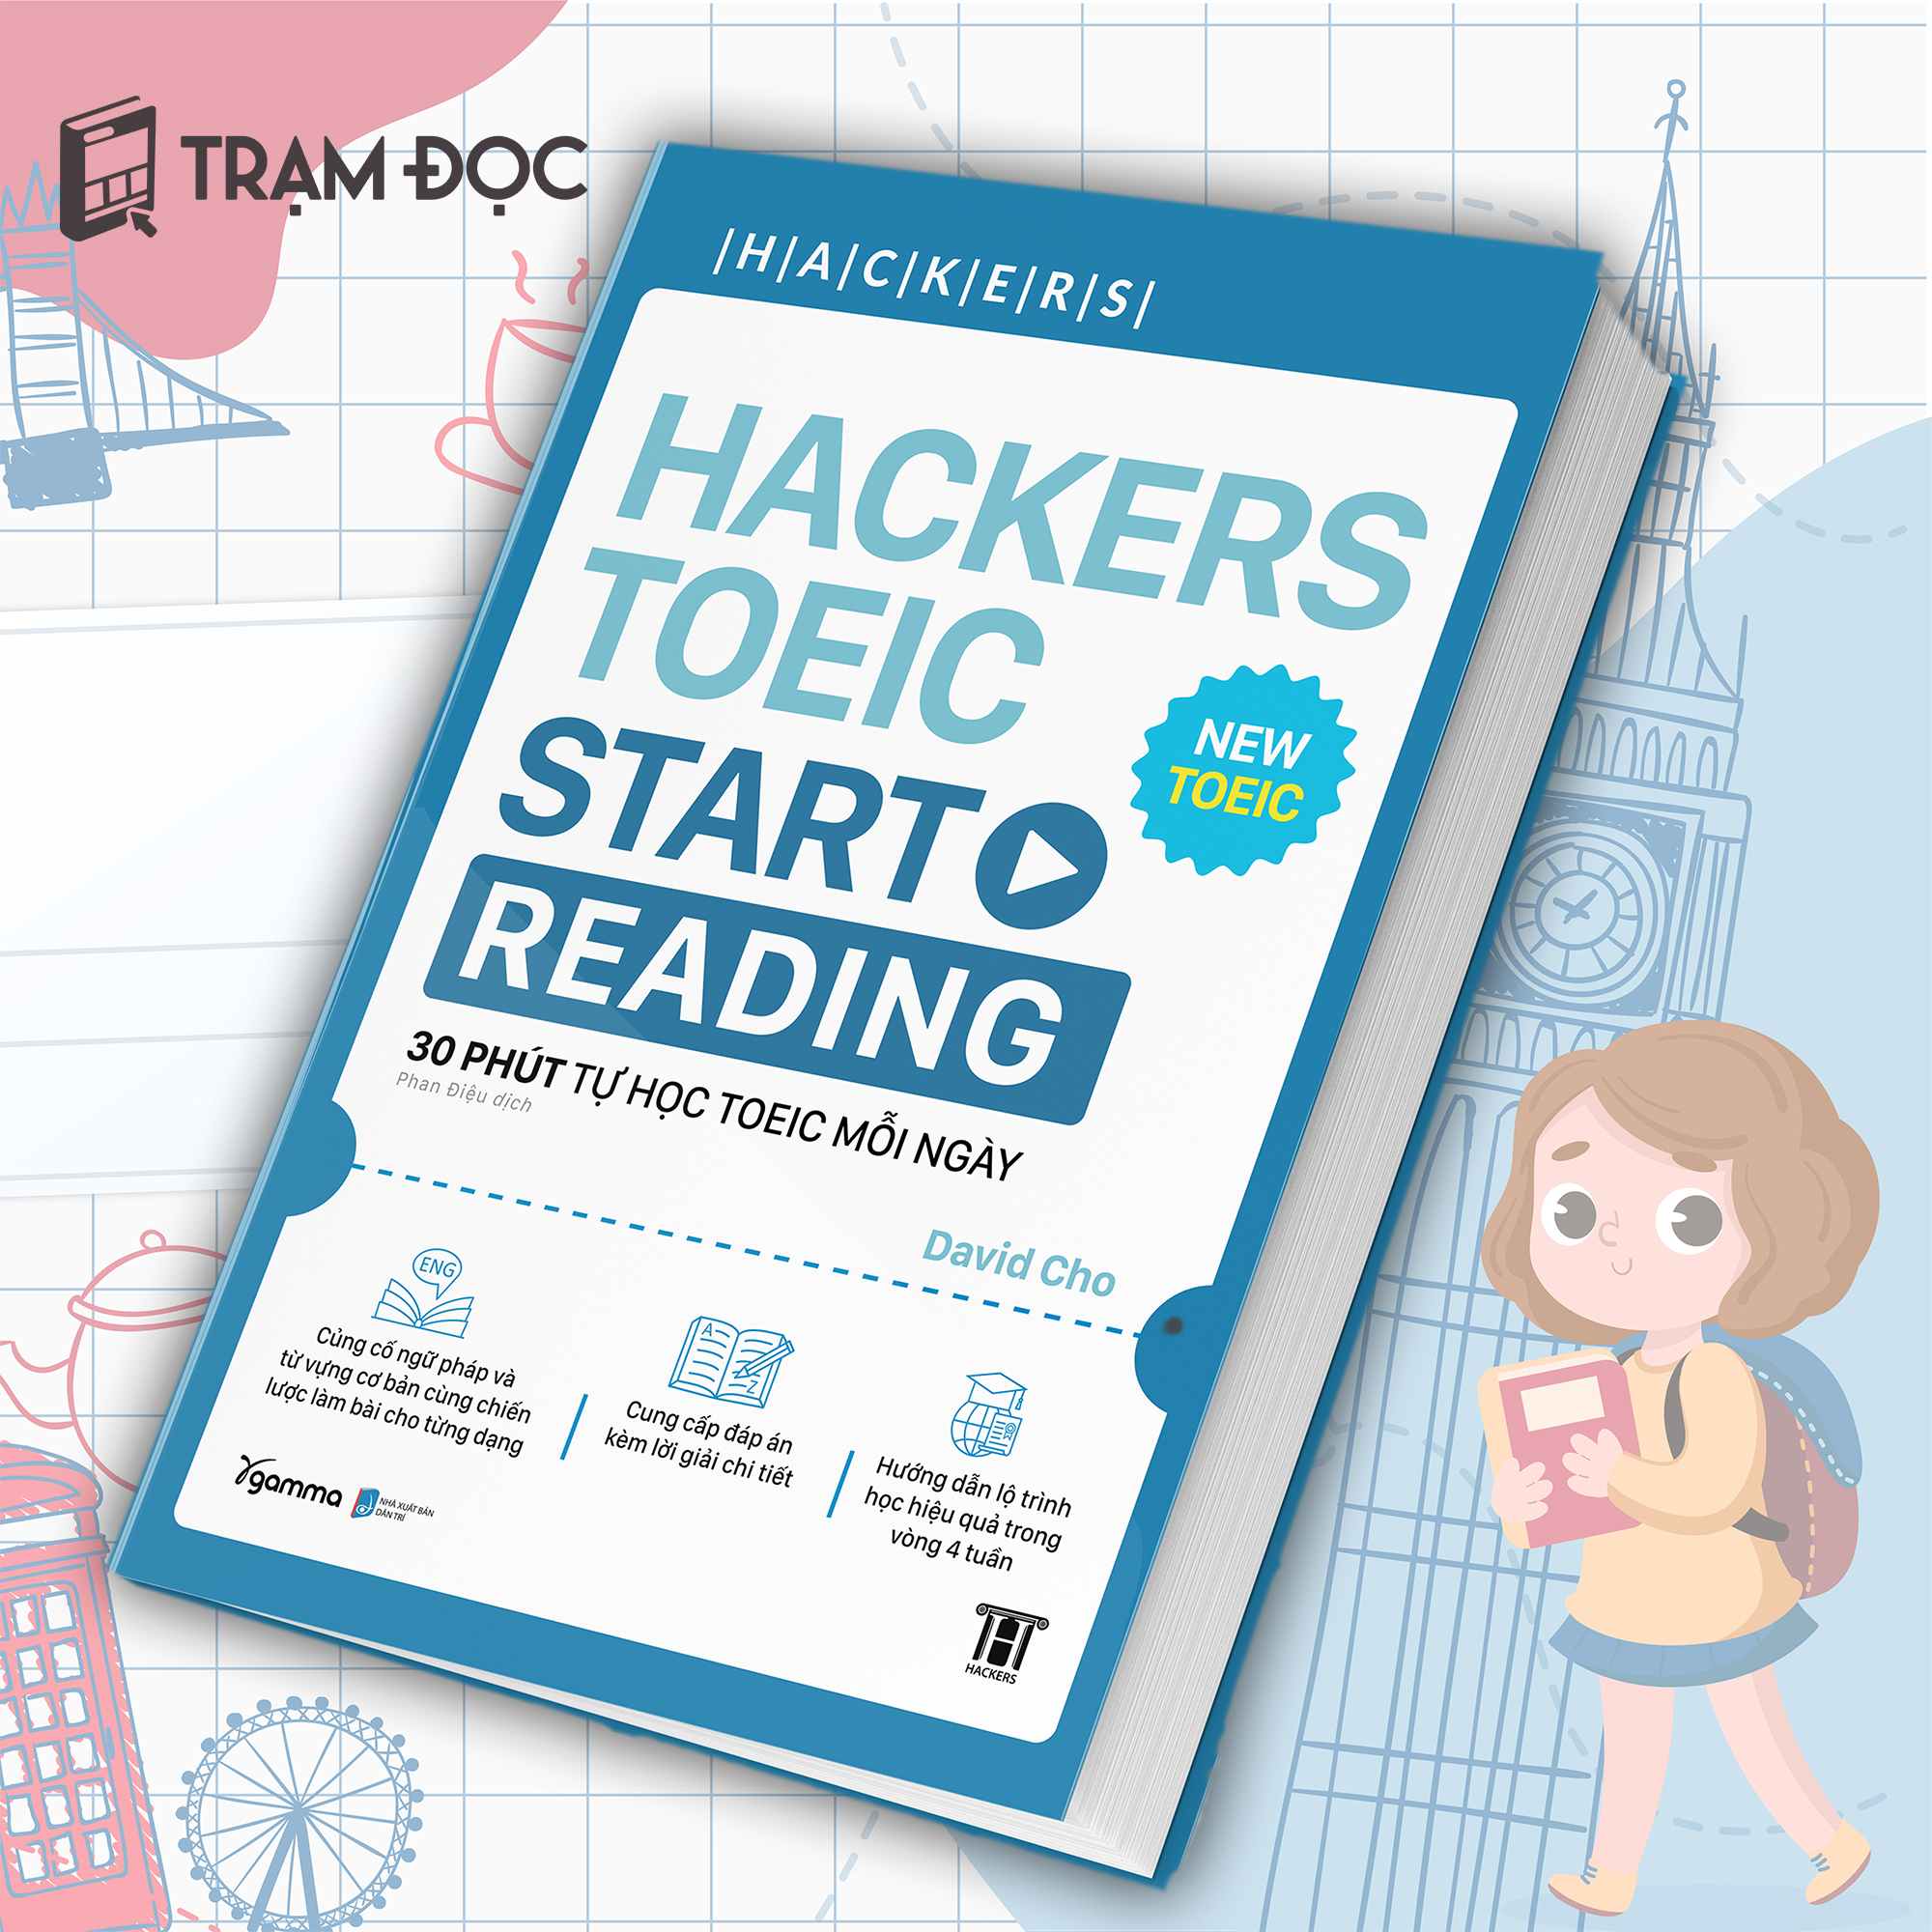 Trạm Đọc Official | Sách: Hackers Toeic Start Reading